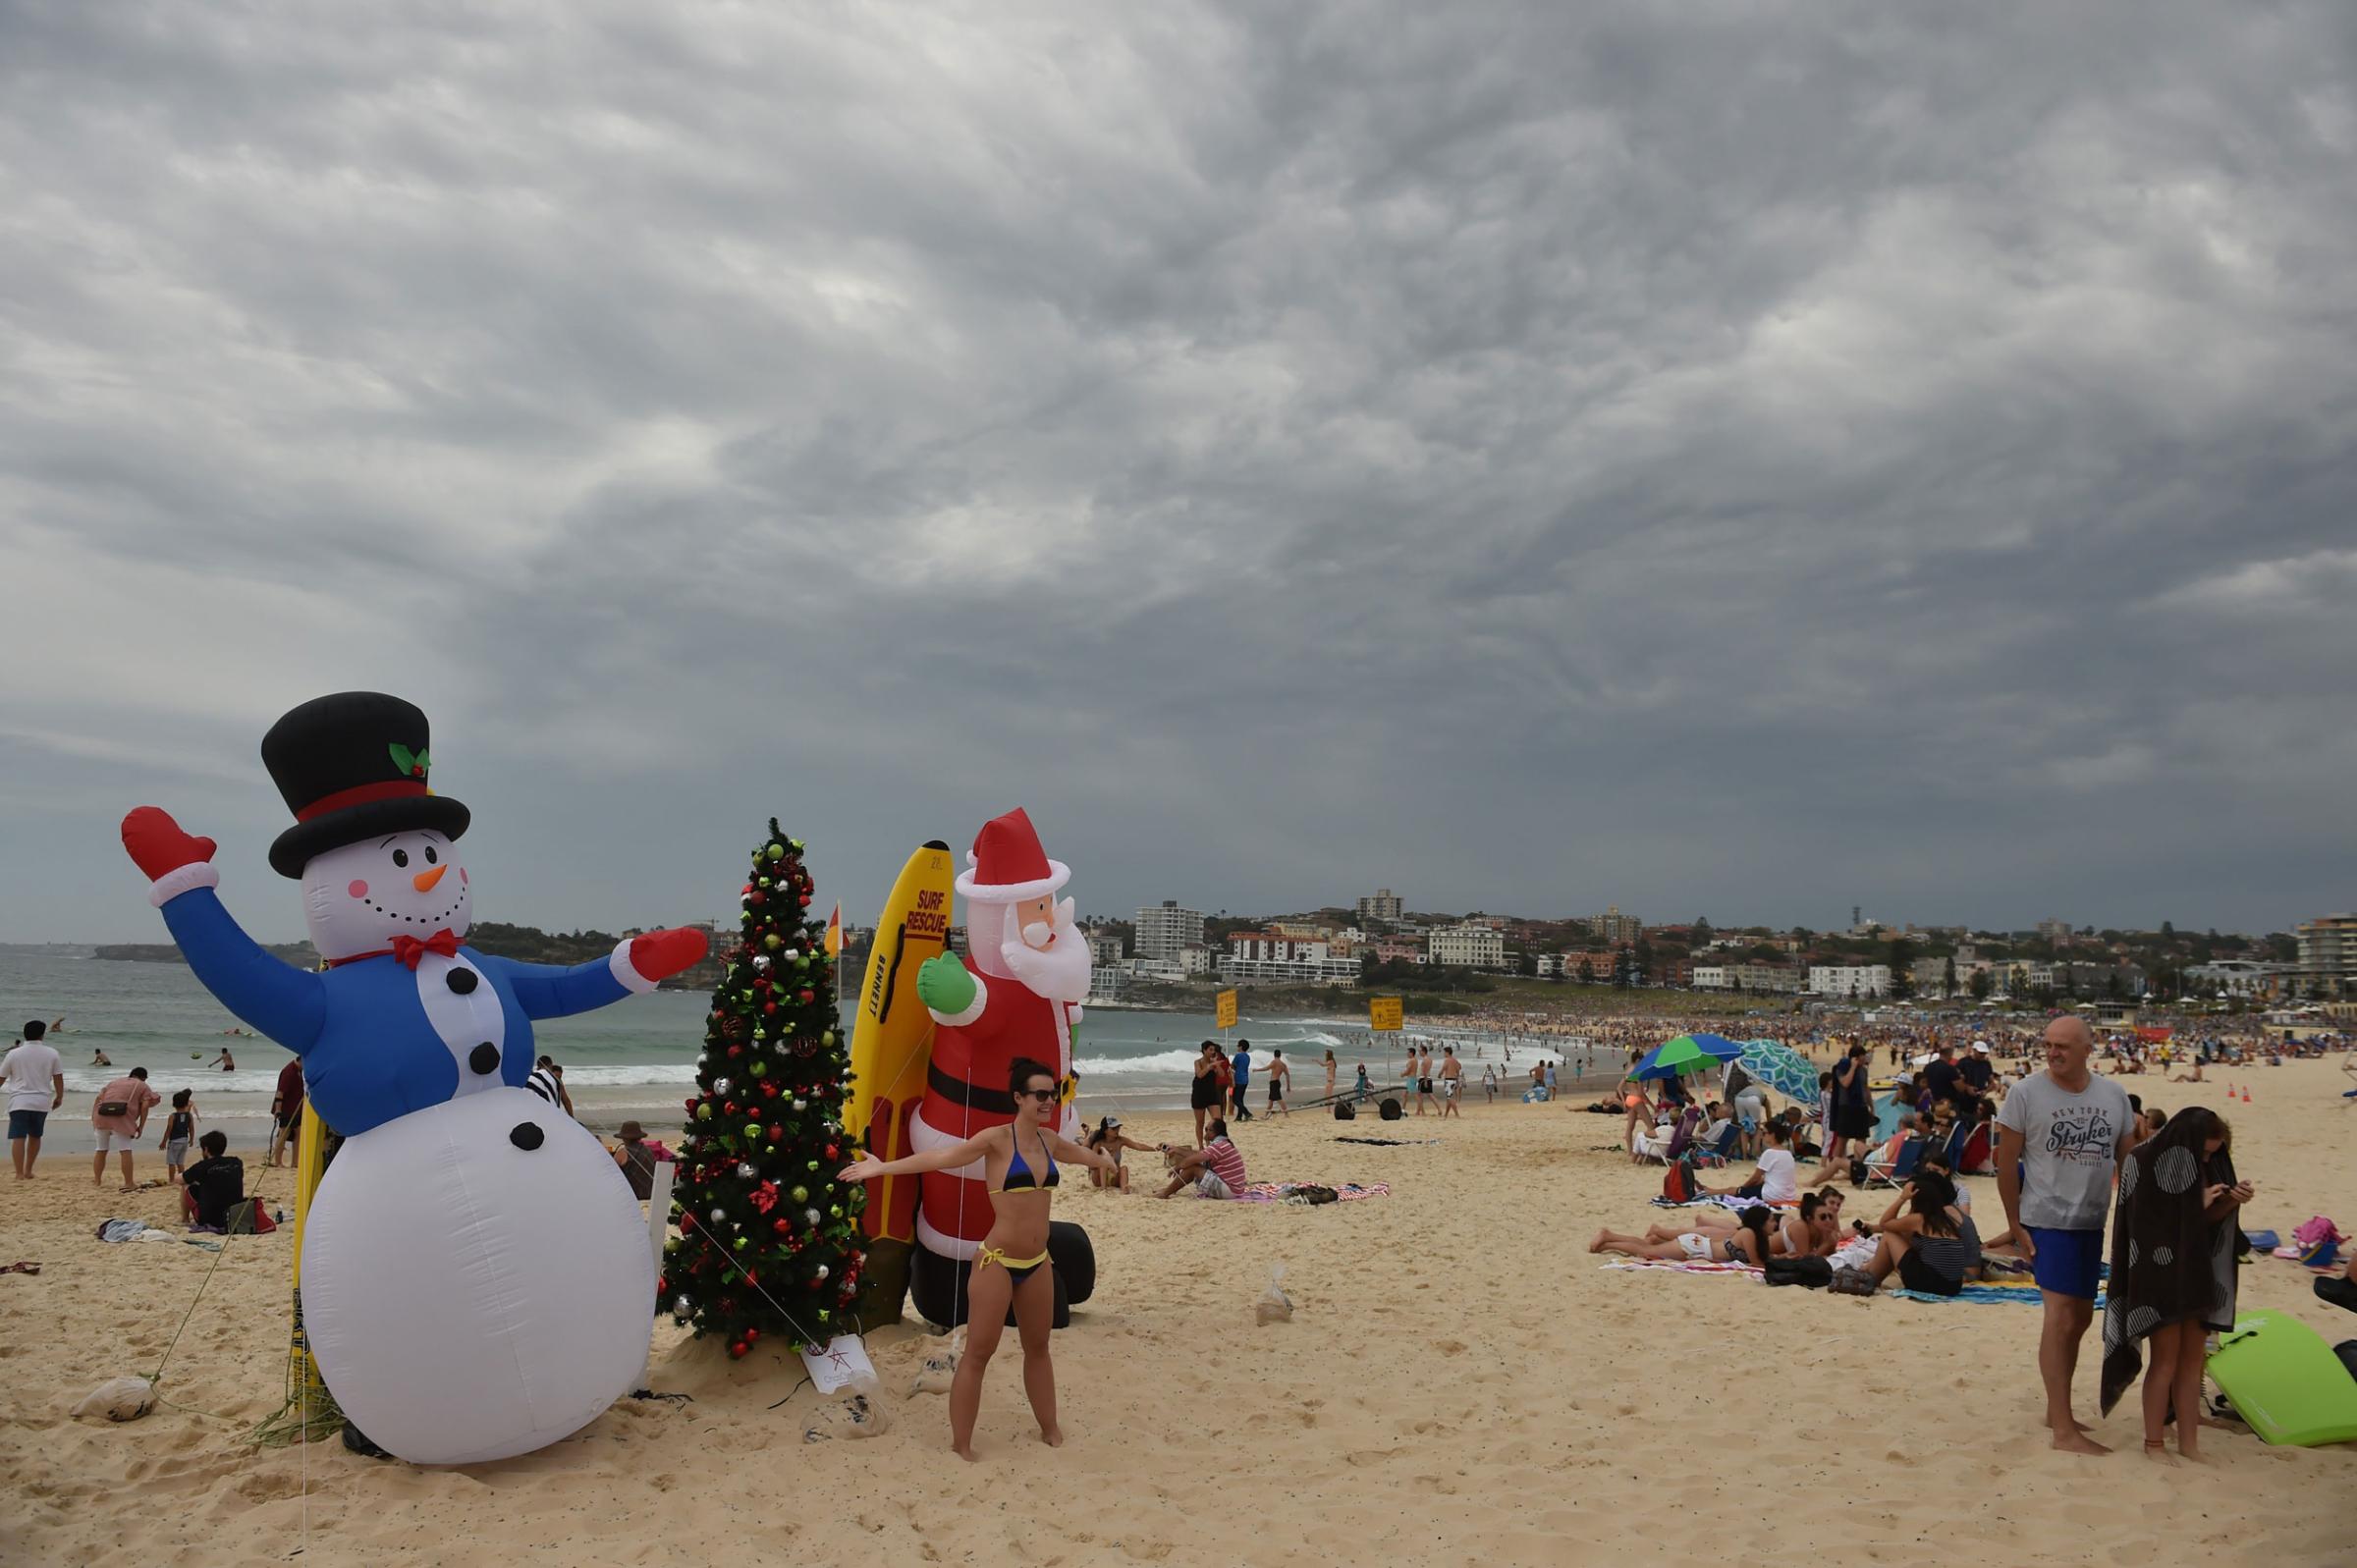 Visitors take photos in front of an inflatable snow man and Santa Claus on Bondi Beach on Christmas Day on Dec. 25, 2014.